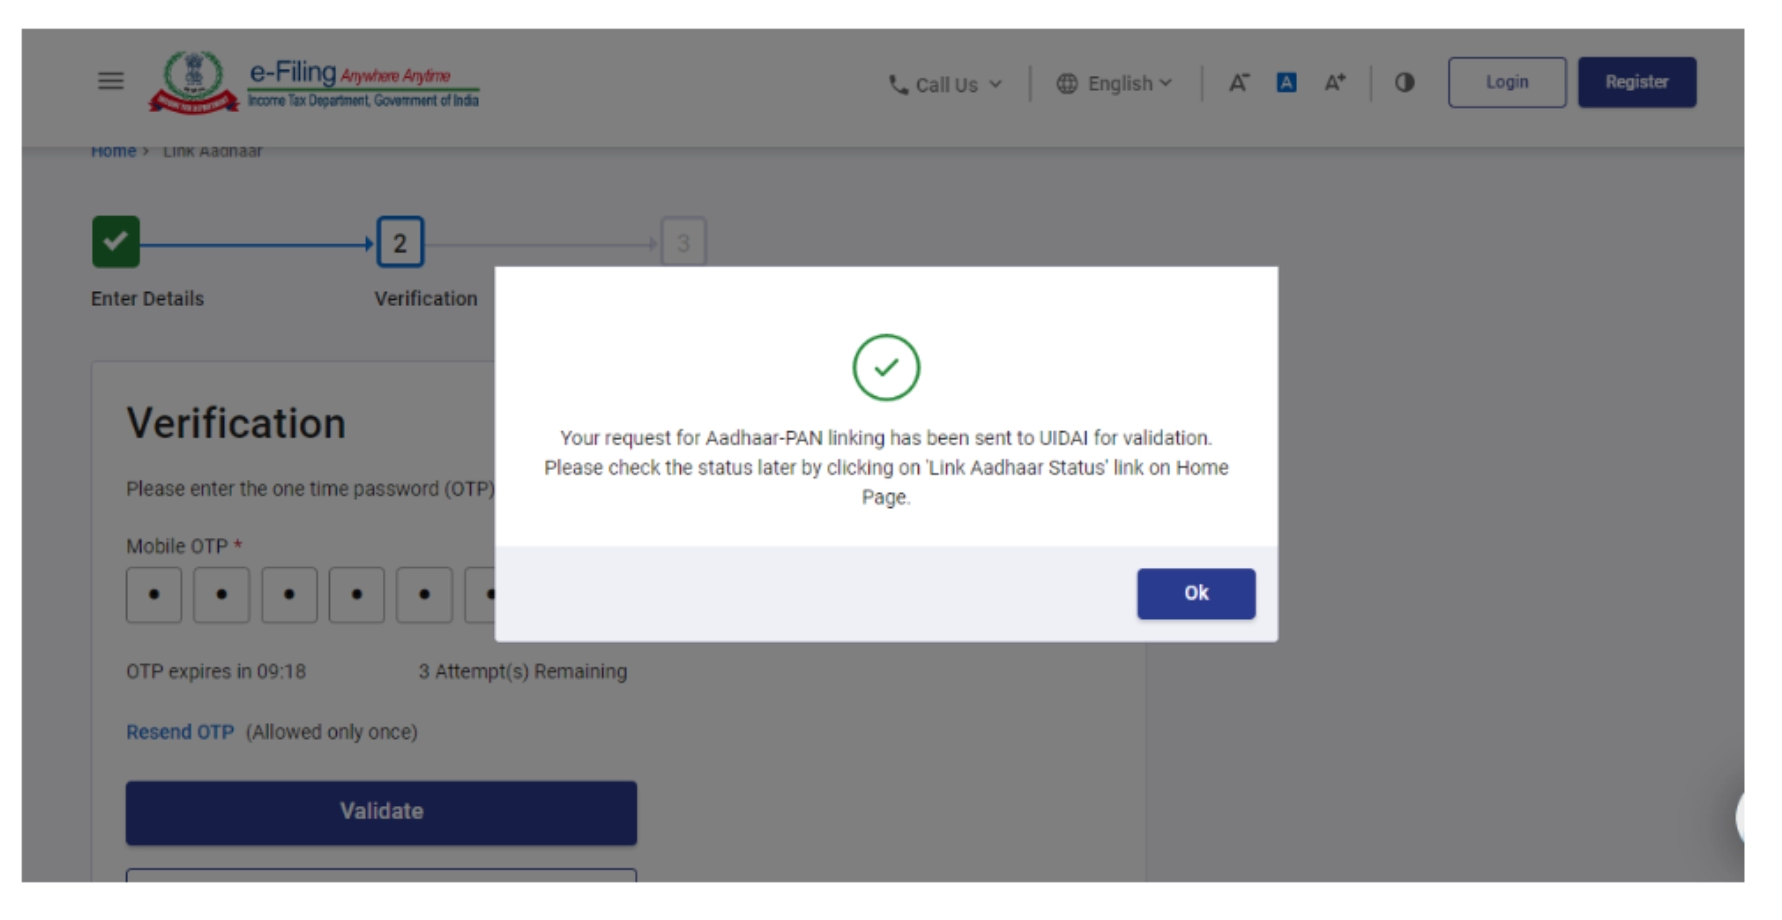 Request Submitted for Linking PAN & Aadhaar